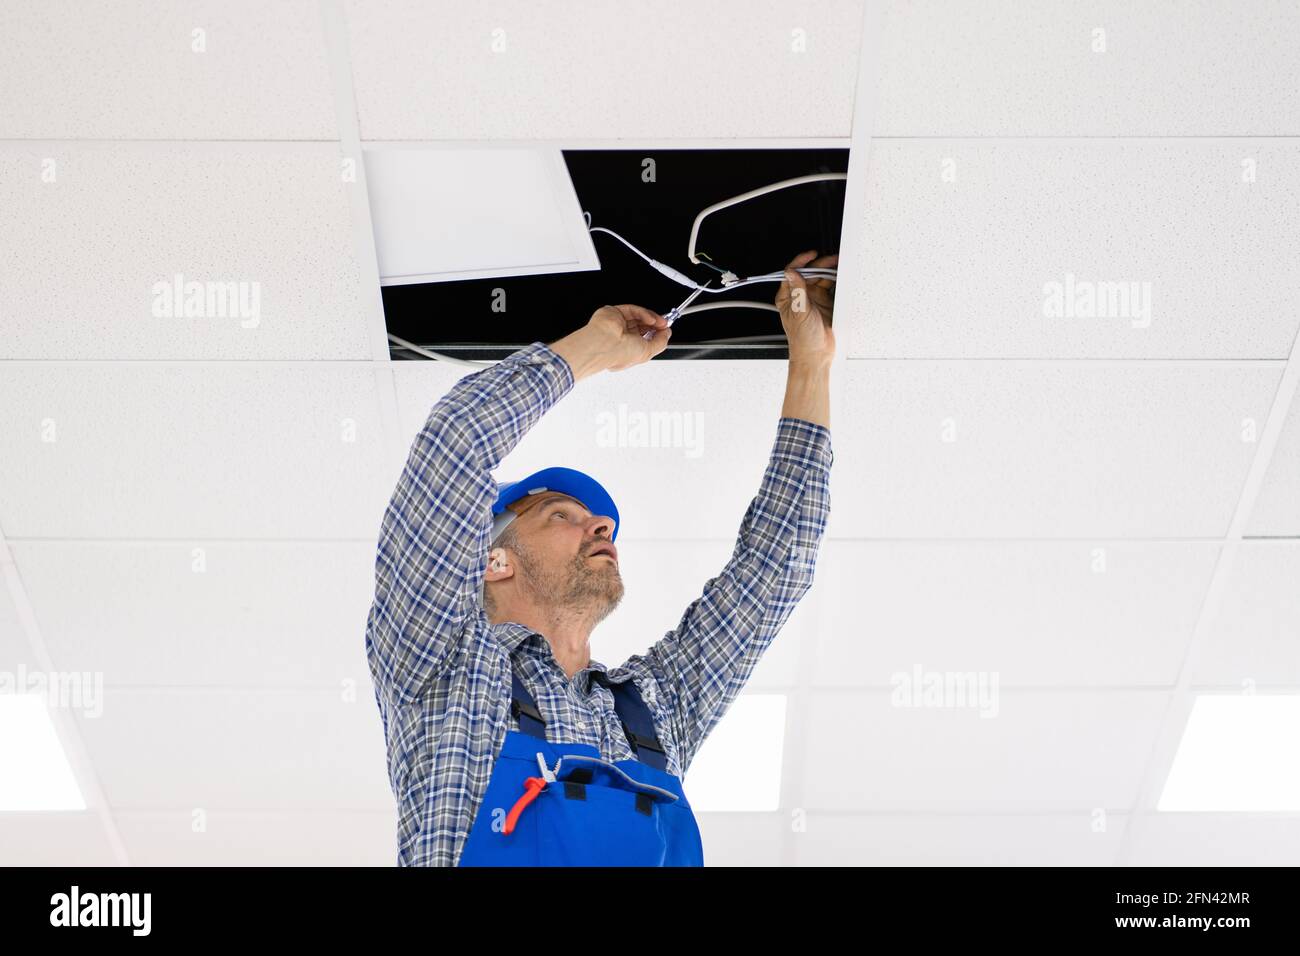 Electrician Installing LED Ceiling Light In Office Stock Photo